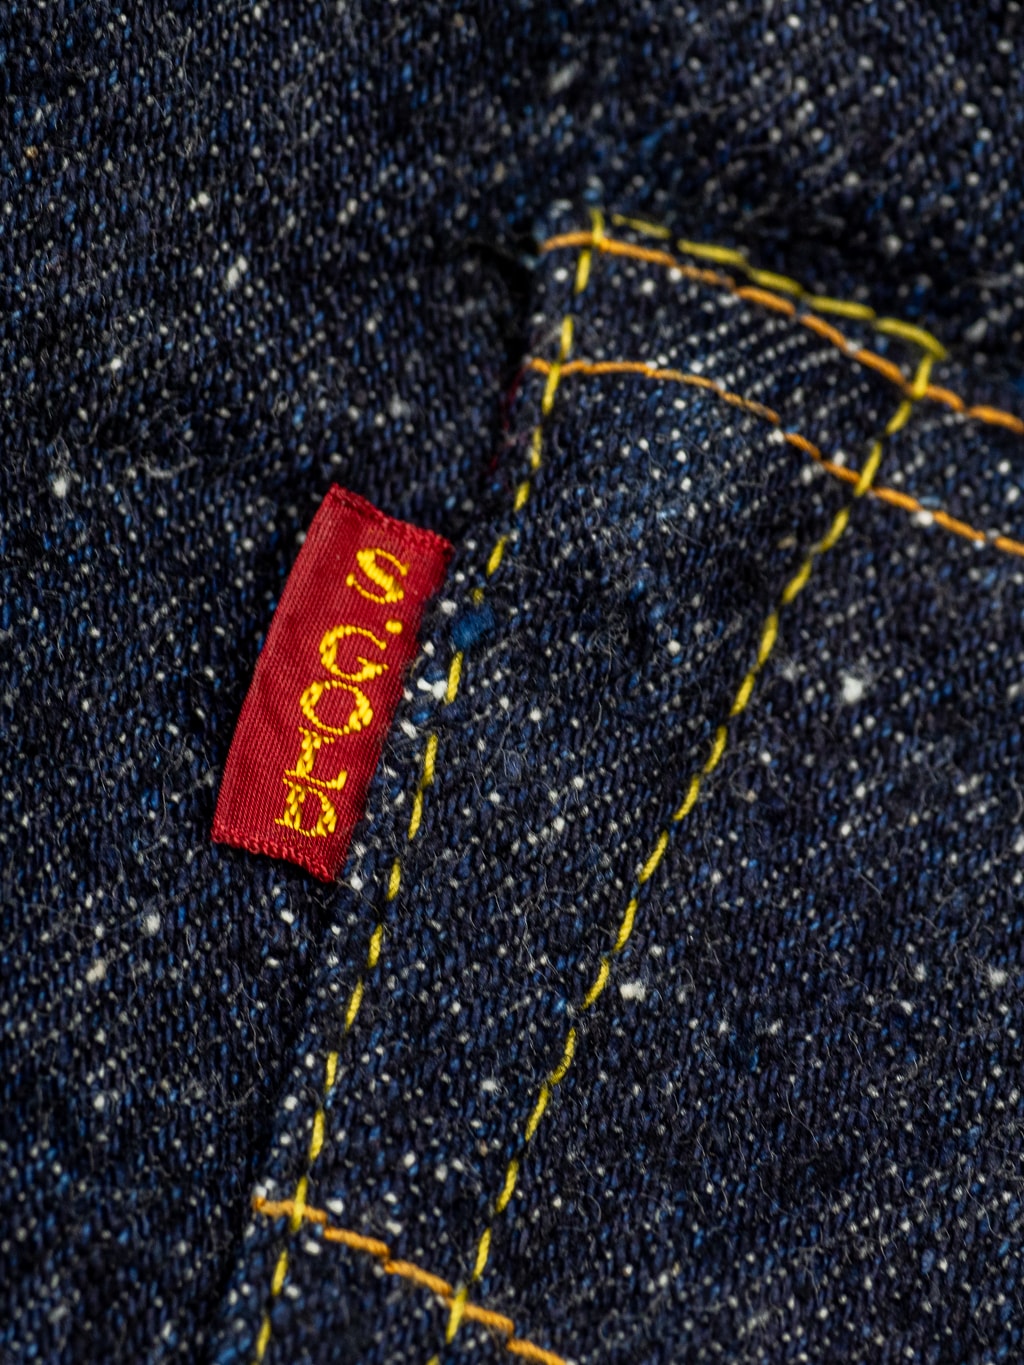 The Strike Gold Keep Earth Natural Indigo Jeans brand red tab